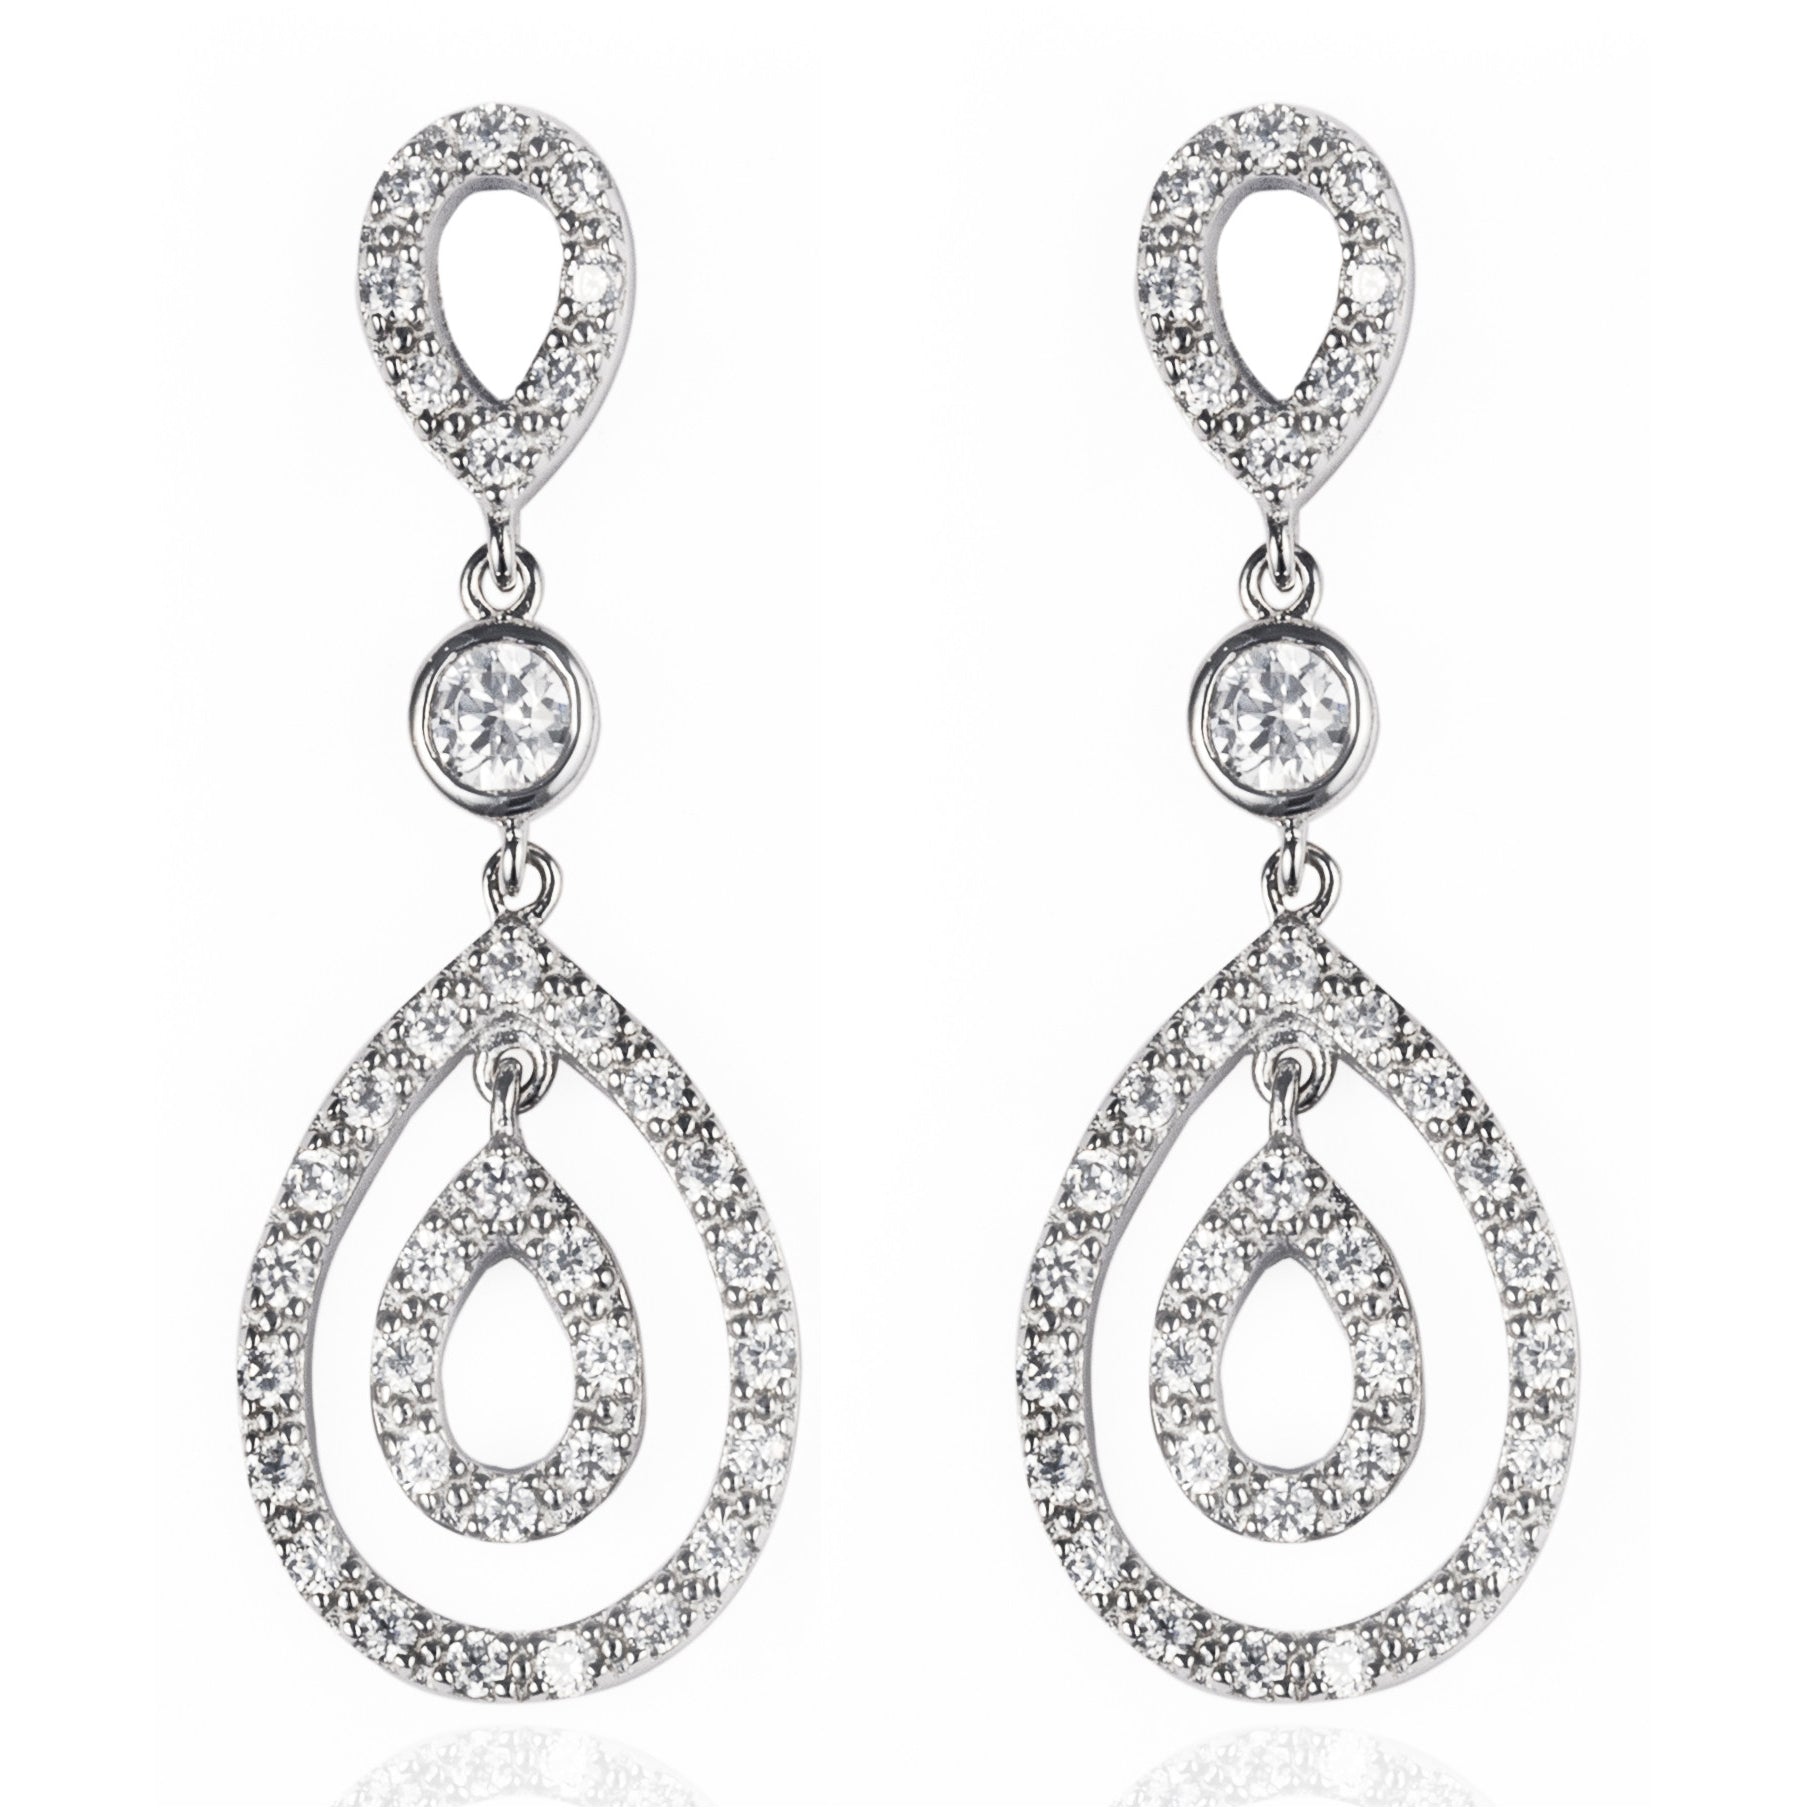 The elegant hanging Audrey Earrings are made of 925 sterling silver and feature many cubic zirconia stones for a glamorous look. Shop luxury jewellery online by Bellagio & Co. Worldwide shipping.